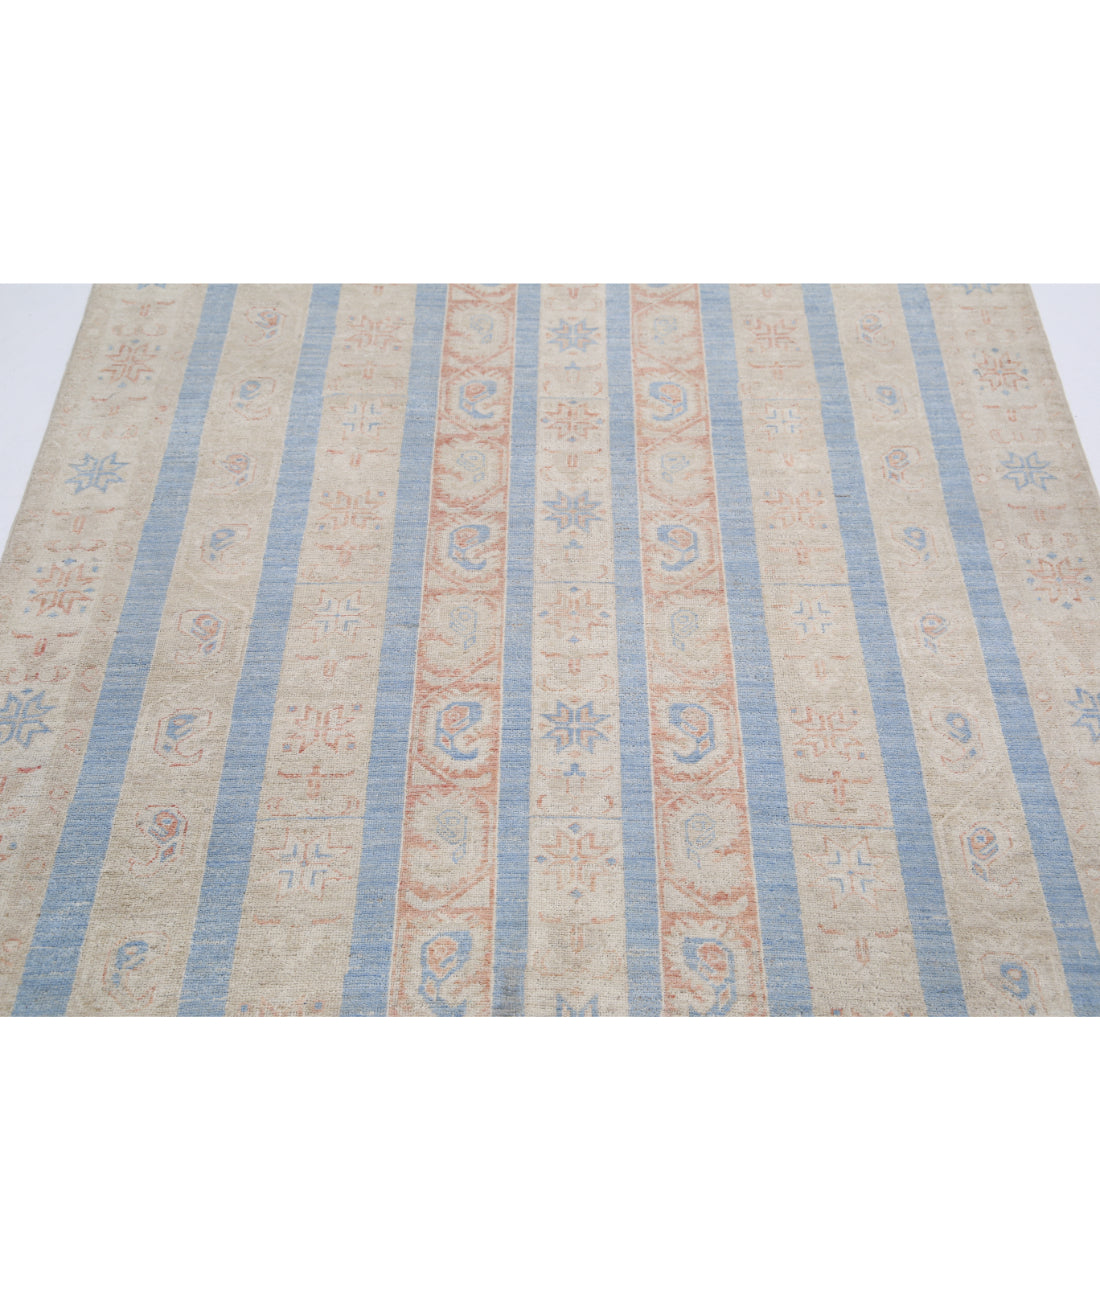 Hand Knotted Shaal Wool Rug - 4'9'' x 6'0'' 4'9'' x 6'0'' (143 X 180) / Multi / Multi